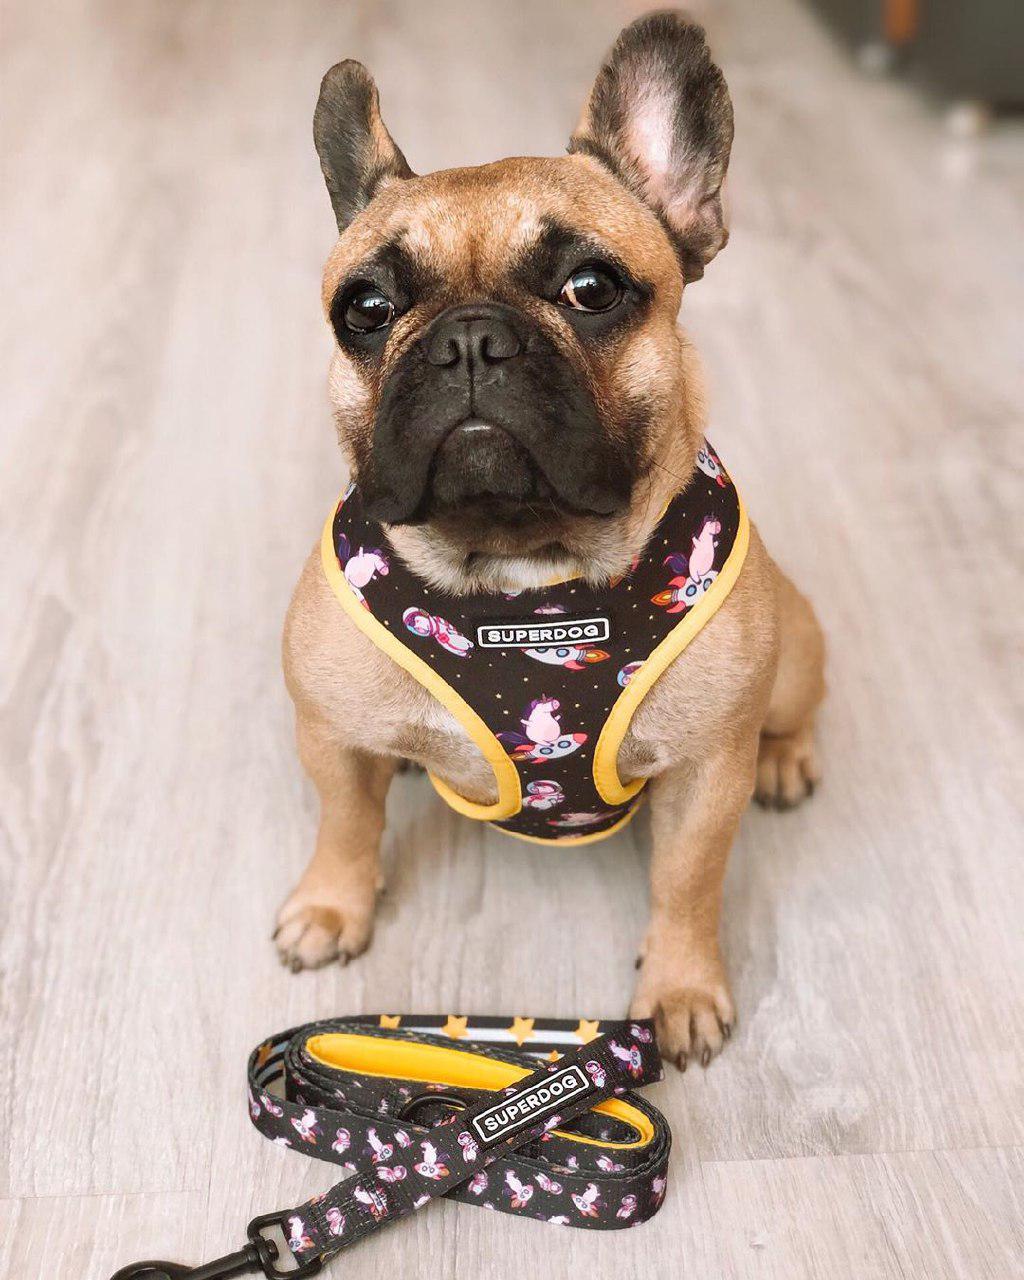 A French Bulldog wearing a harness while sitting on the floor behind the leash